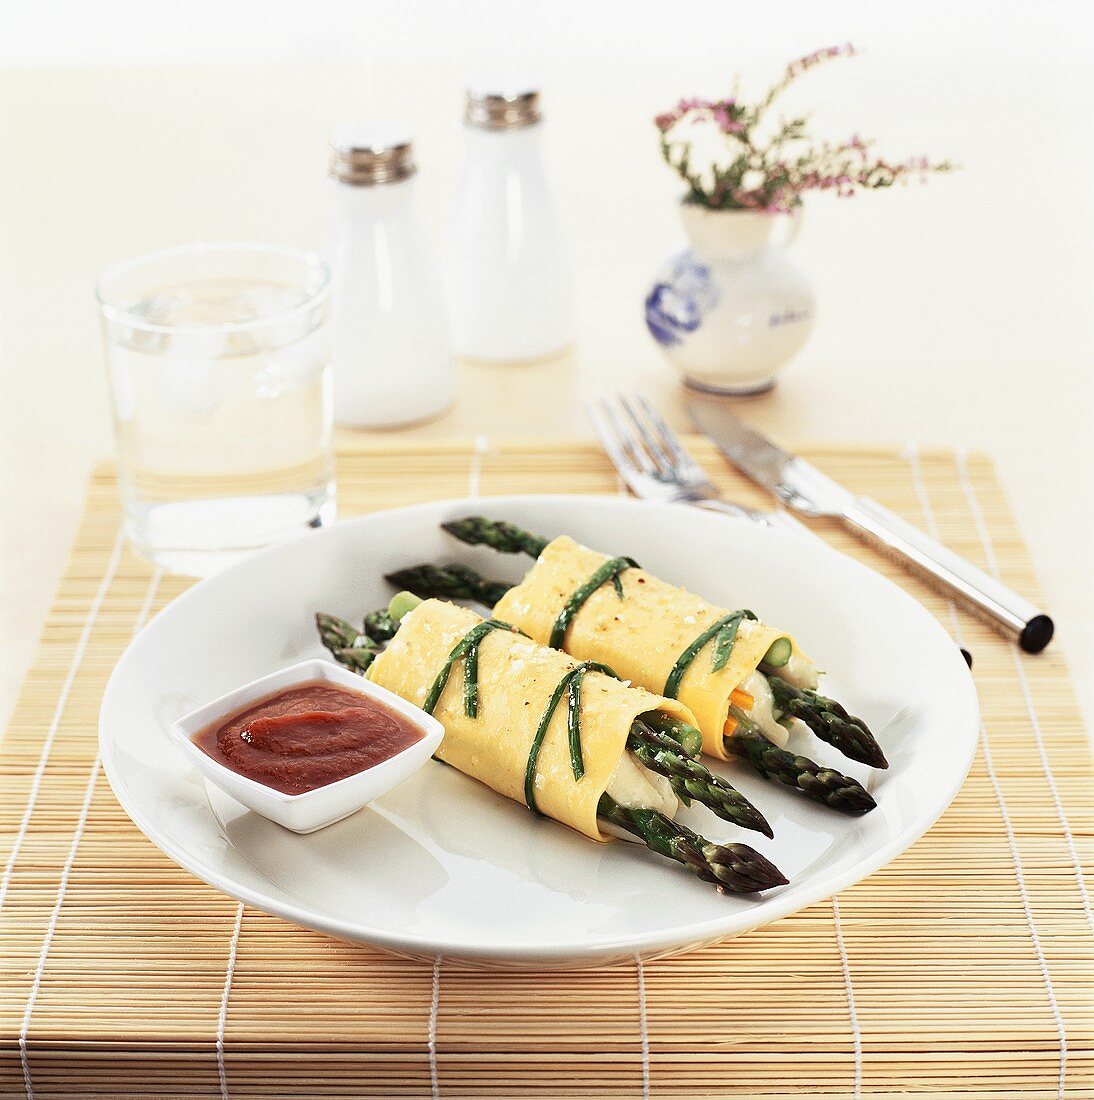 Cannelloni with asparagus filling and tomato sauce